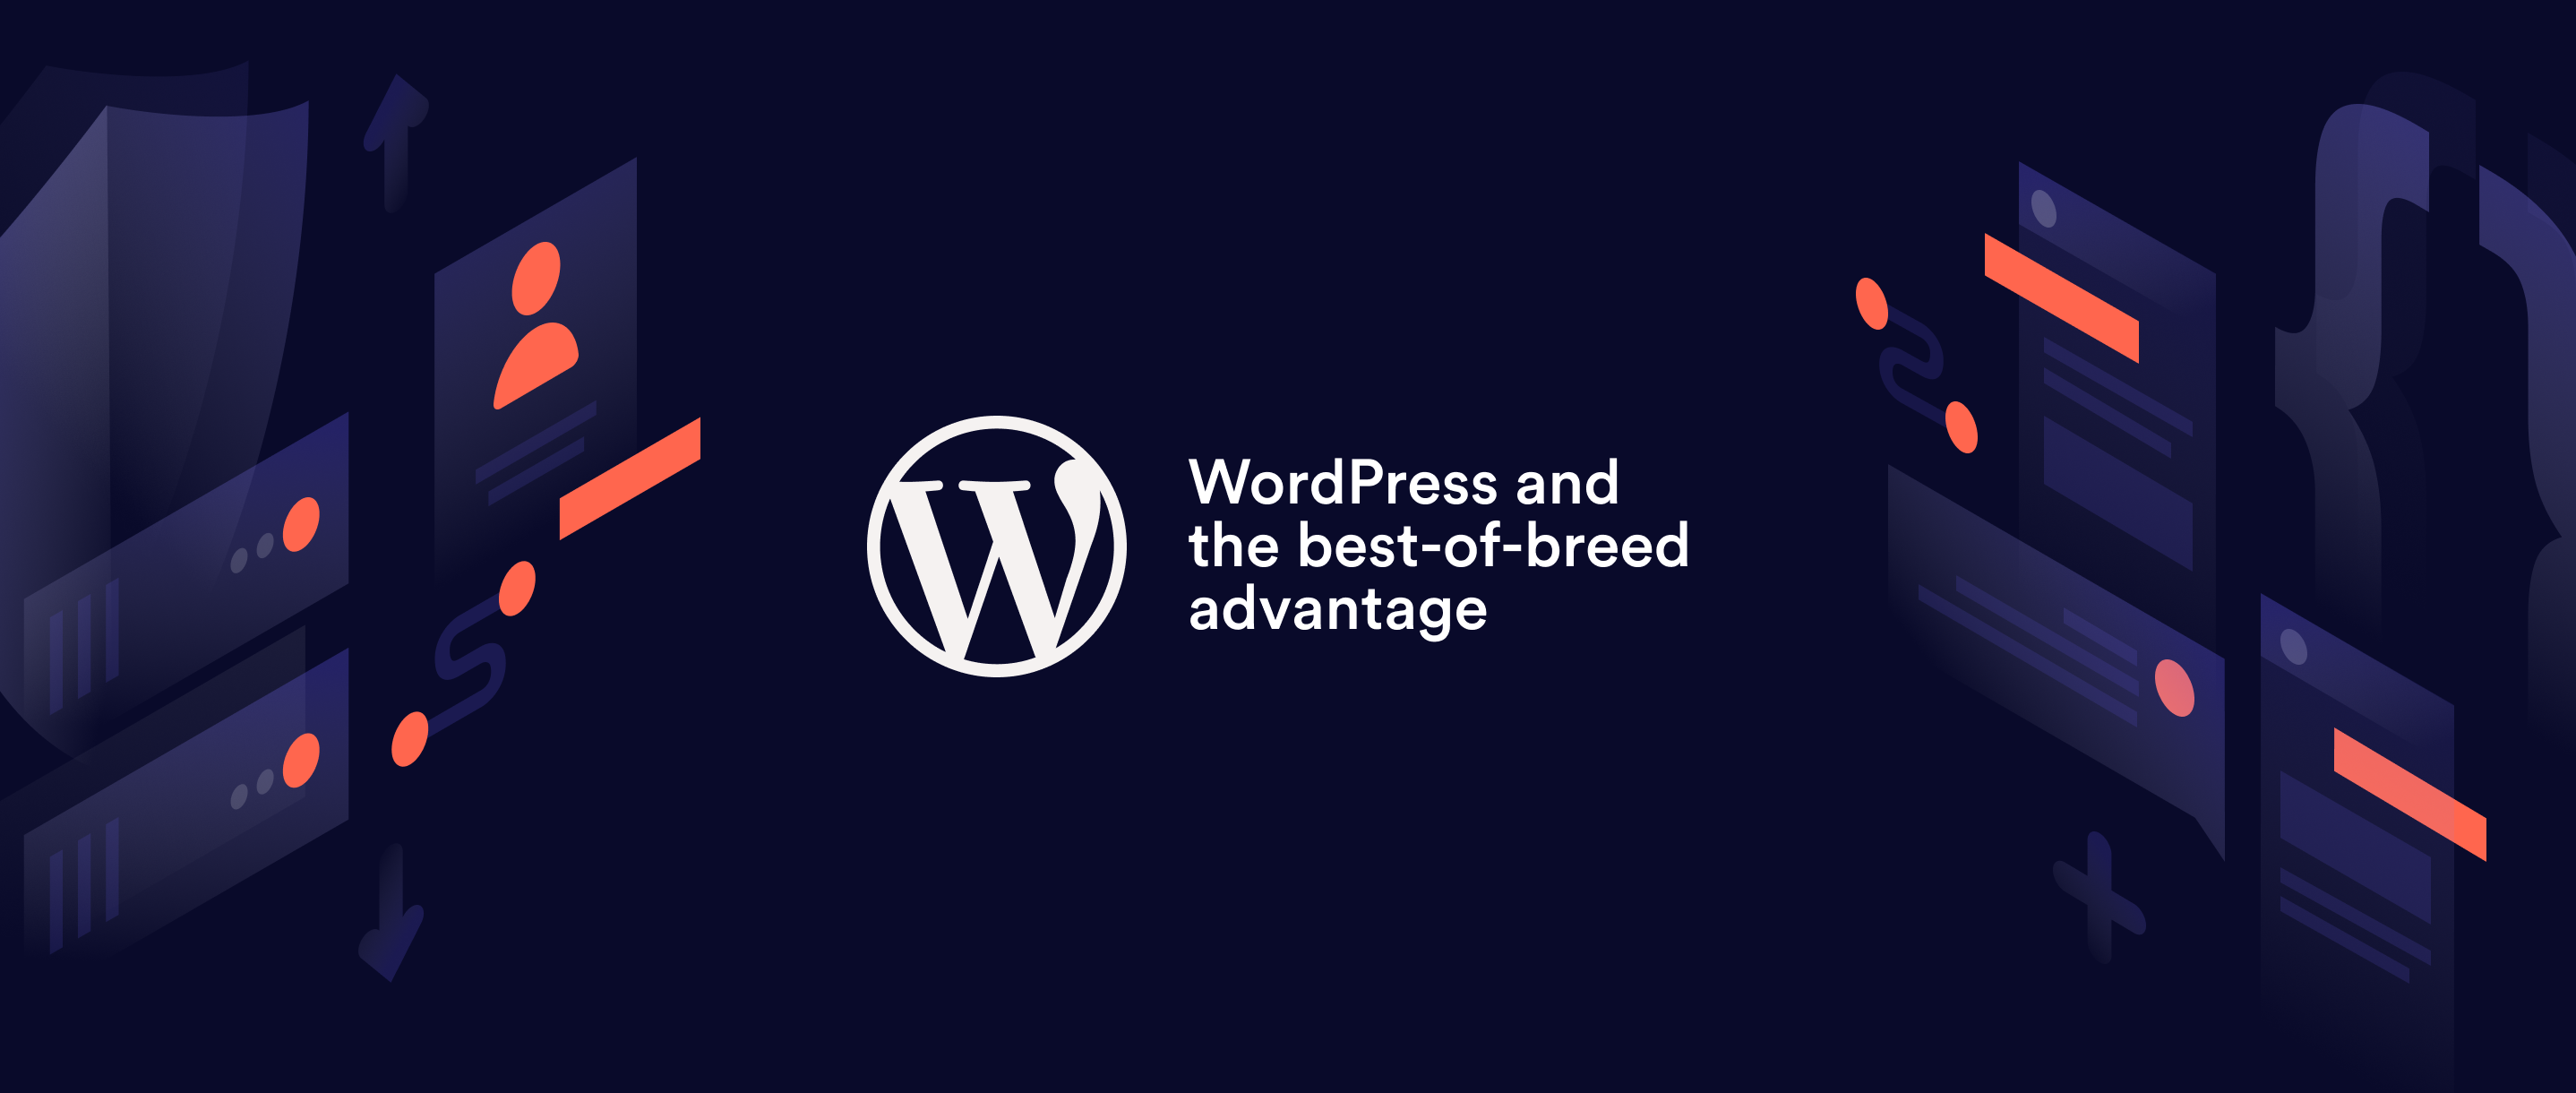 Breaking free: WordPress and the best-of-breed advantage